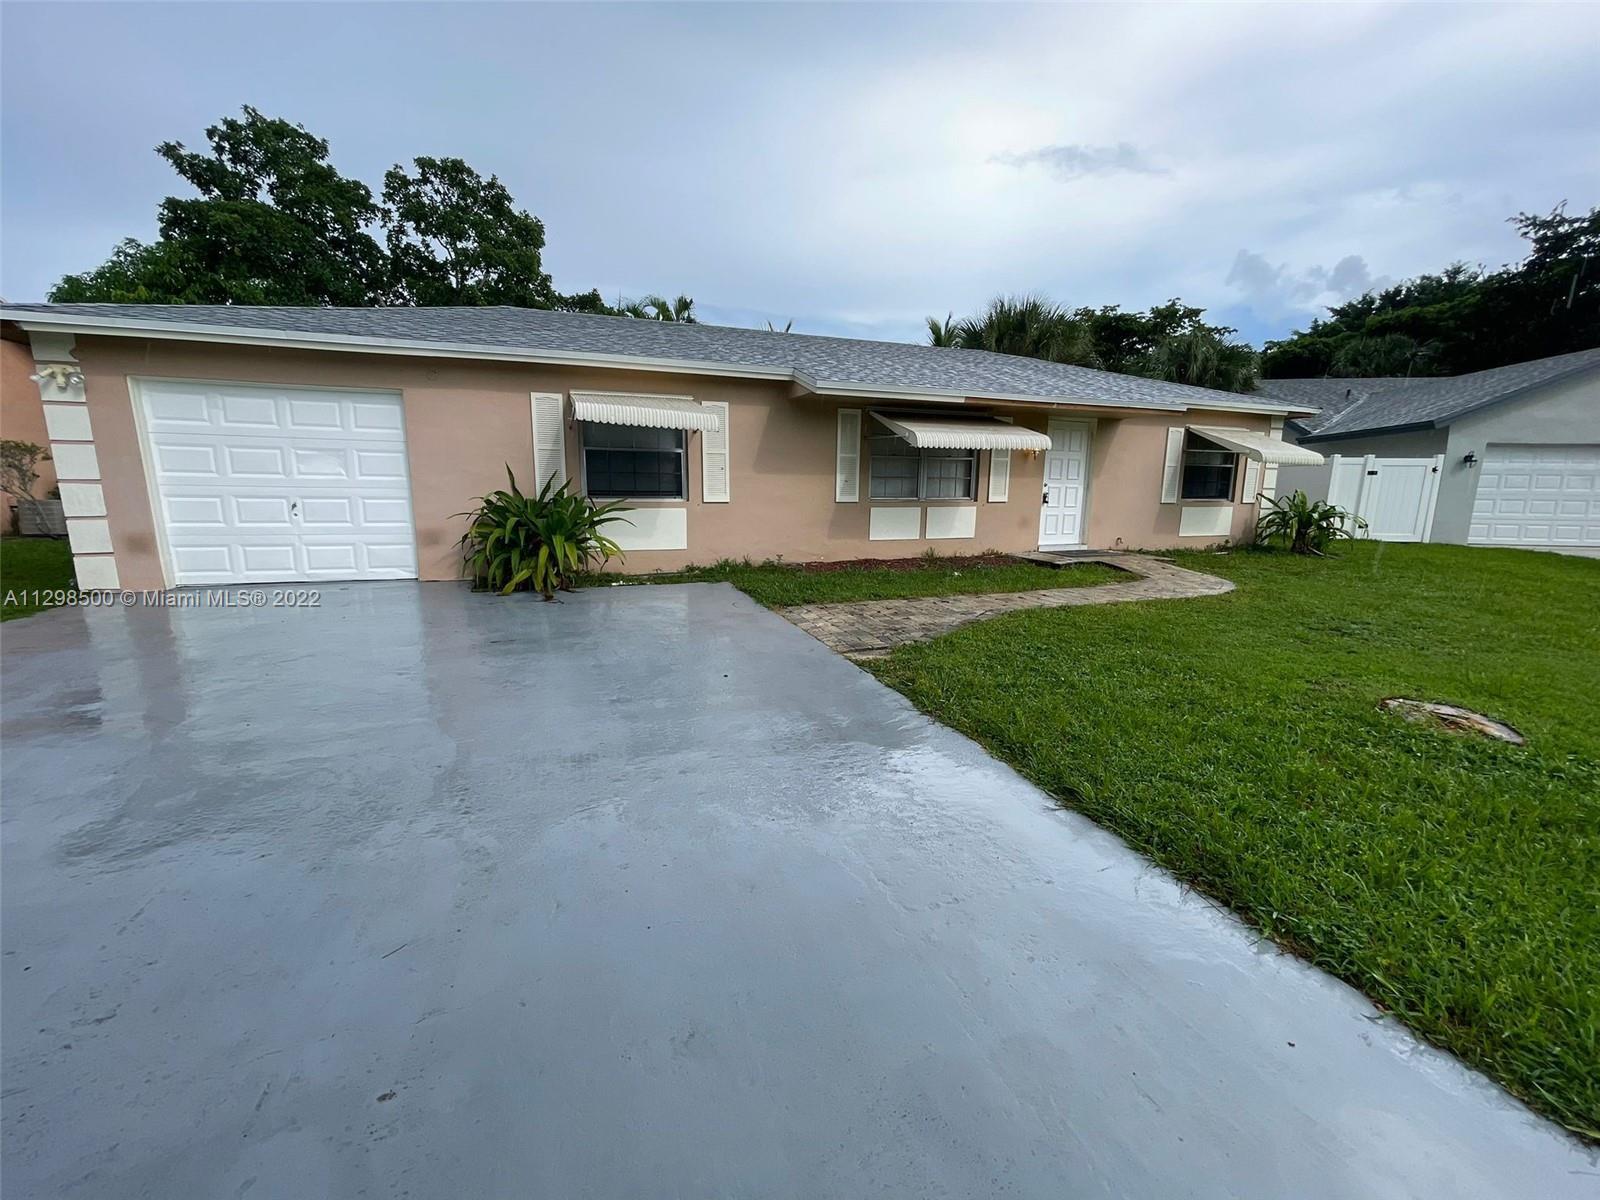 A MUST SEE AND WILL NOT LAST LONG. THIS 3/2 SINGLE FAMILY IS CENTRALLY LOCATED IN THE HEART OF BOCA 